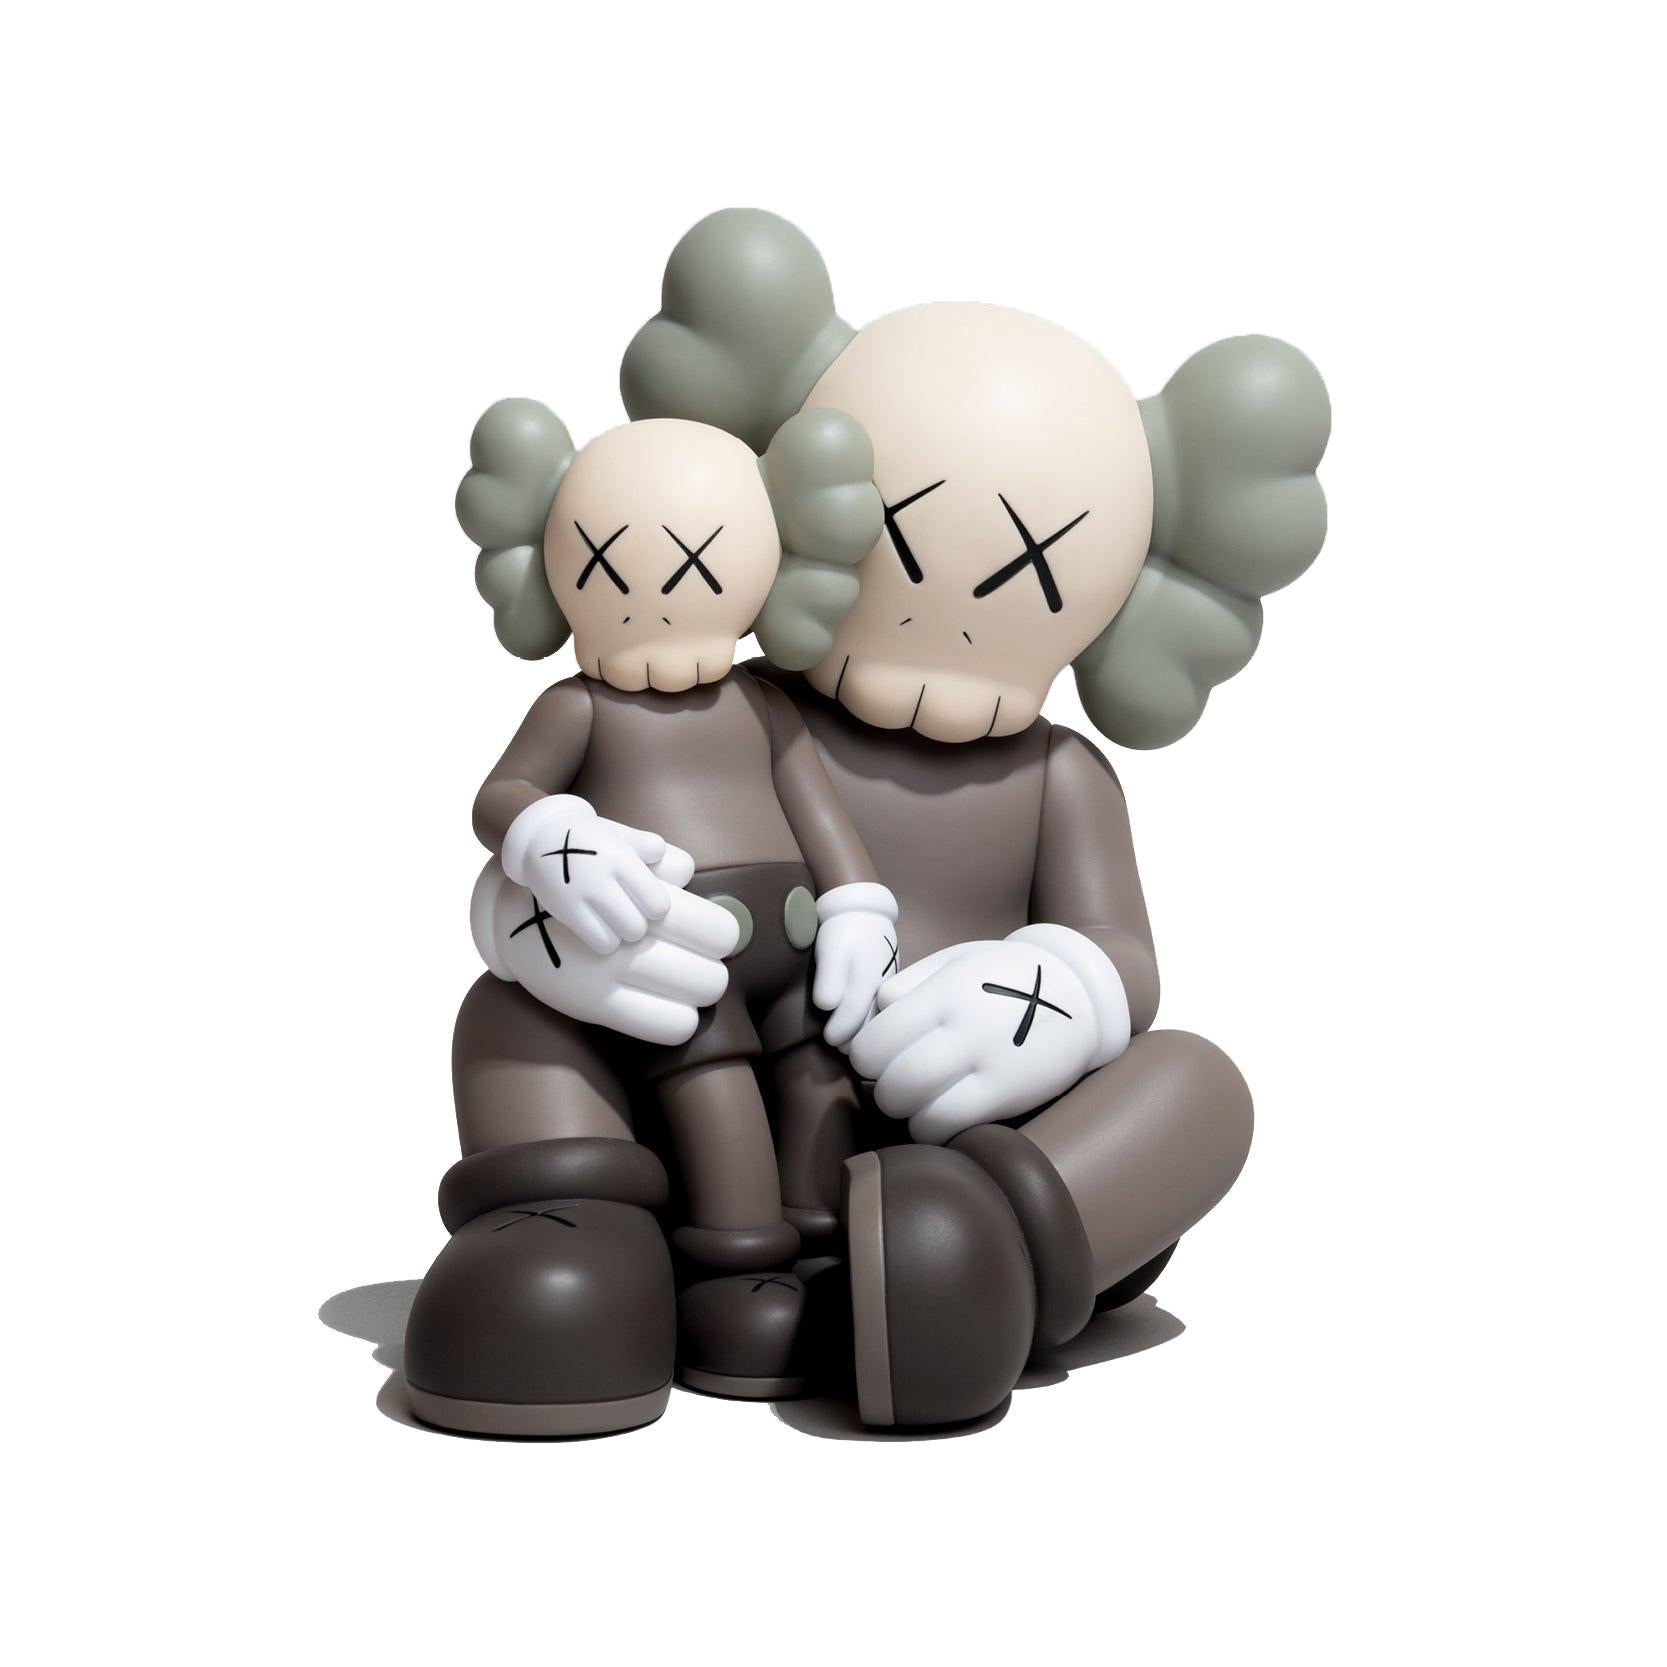 KAWS Holiday Changbai Mountain: set of 3 works (KAWS Changbai):
A beautifully composed KAWS COMPANION set published to commemorate KAWS' larger-scale sculpture of same, at Changbai Mountain in Jilin Province, China. These three pieces feature the